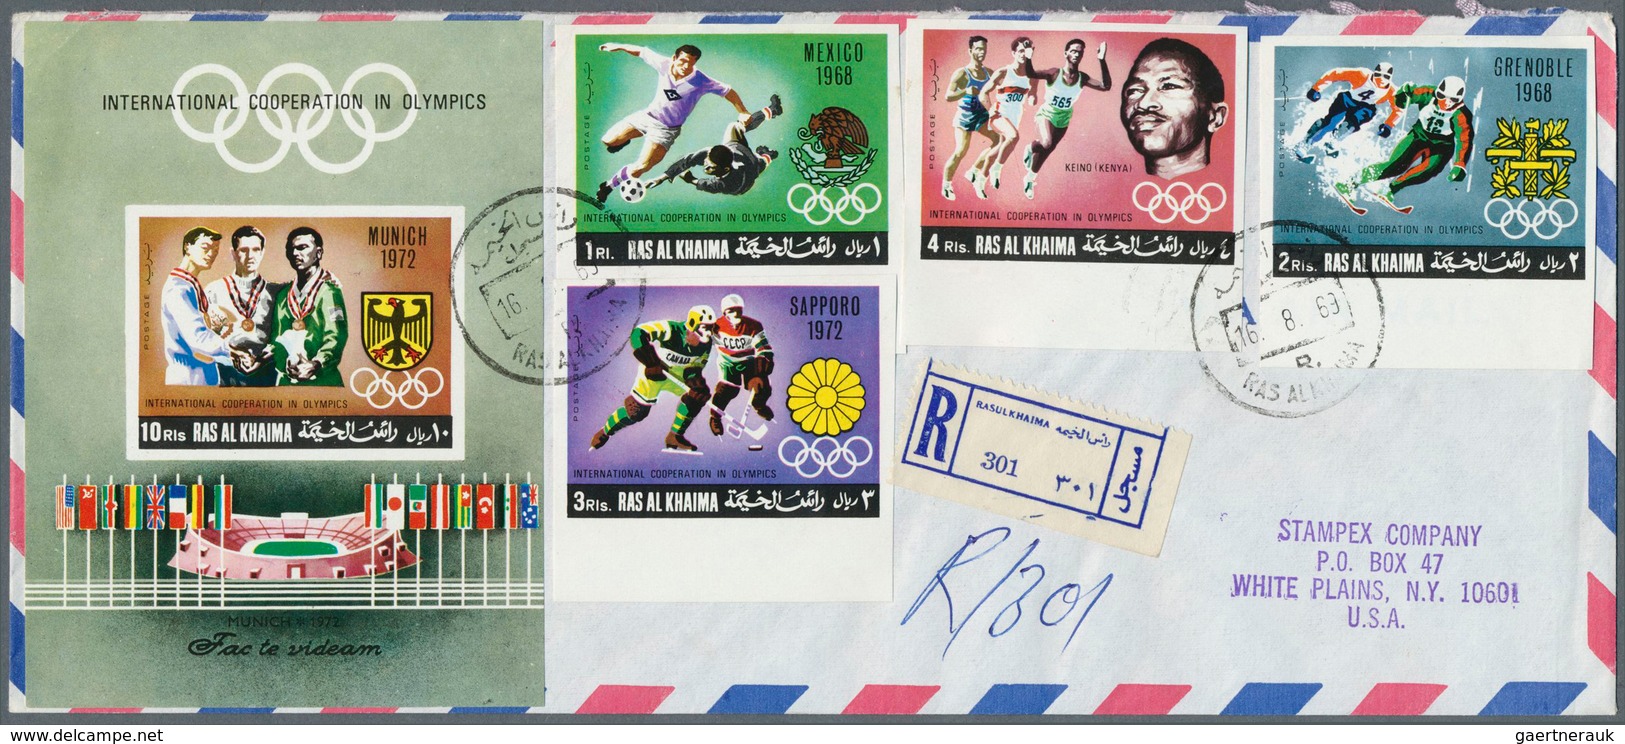 09650 Ras al Khaima: 1969, Olympic Games Cooperation, five registered airmail covers tor USA with arrival